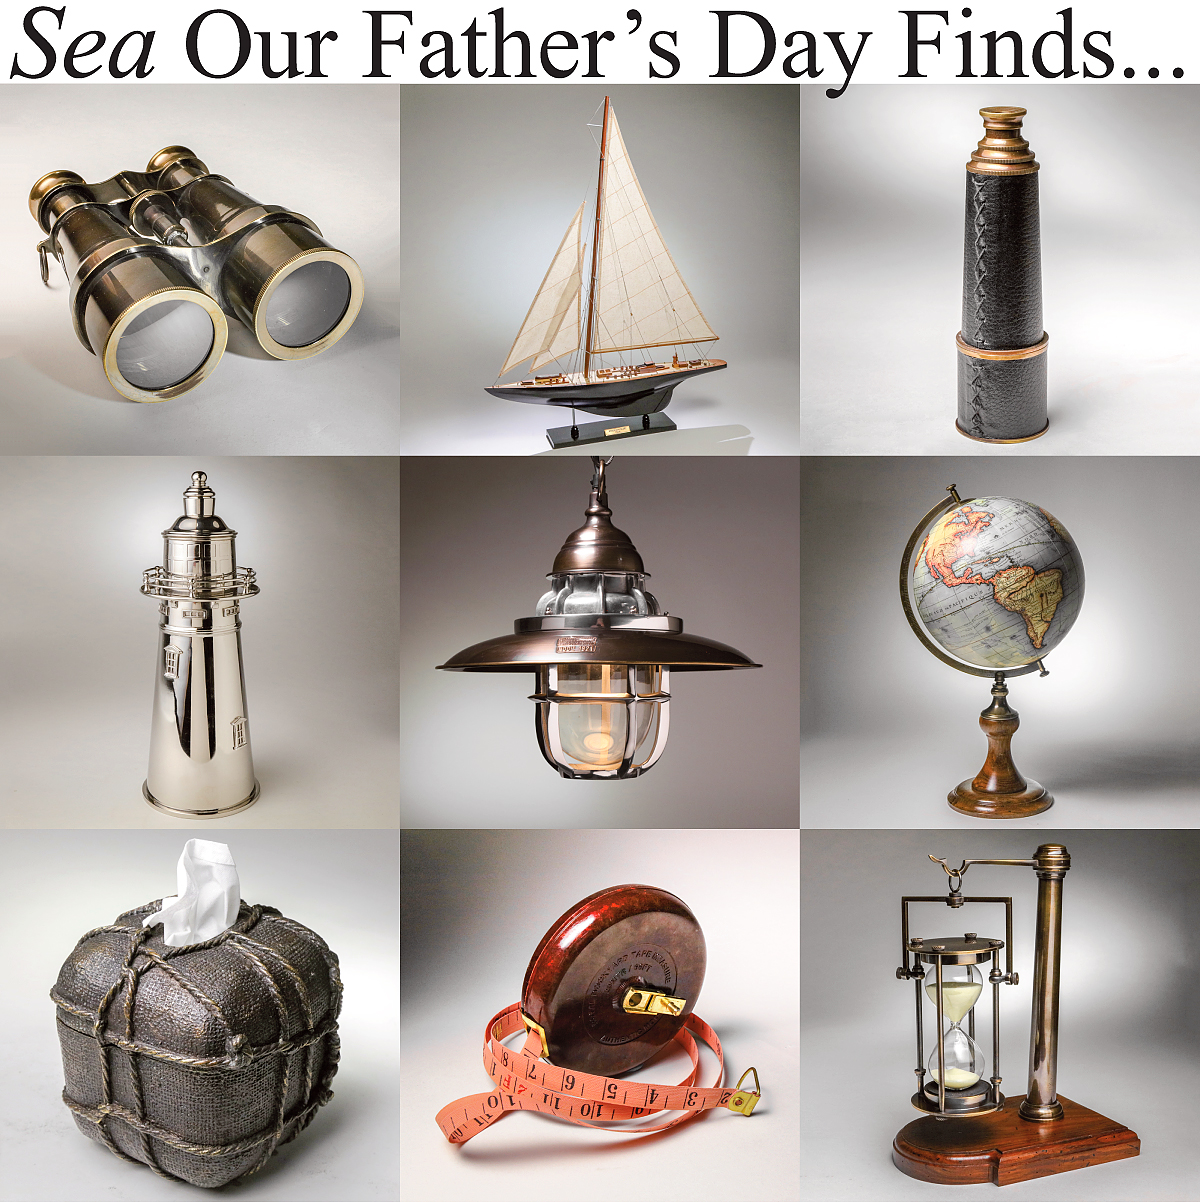 Sea Our Father's Day Finds...